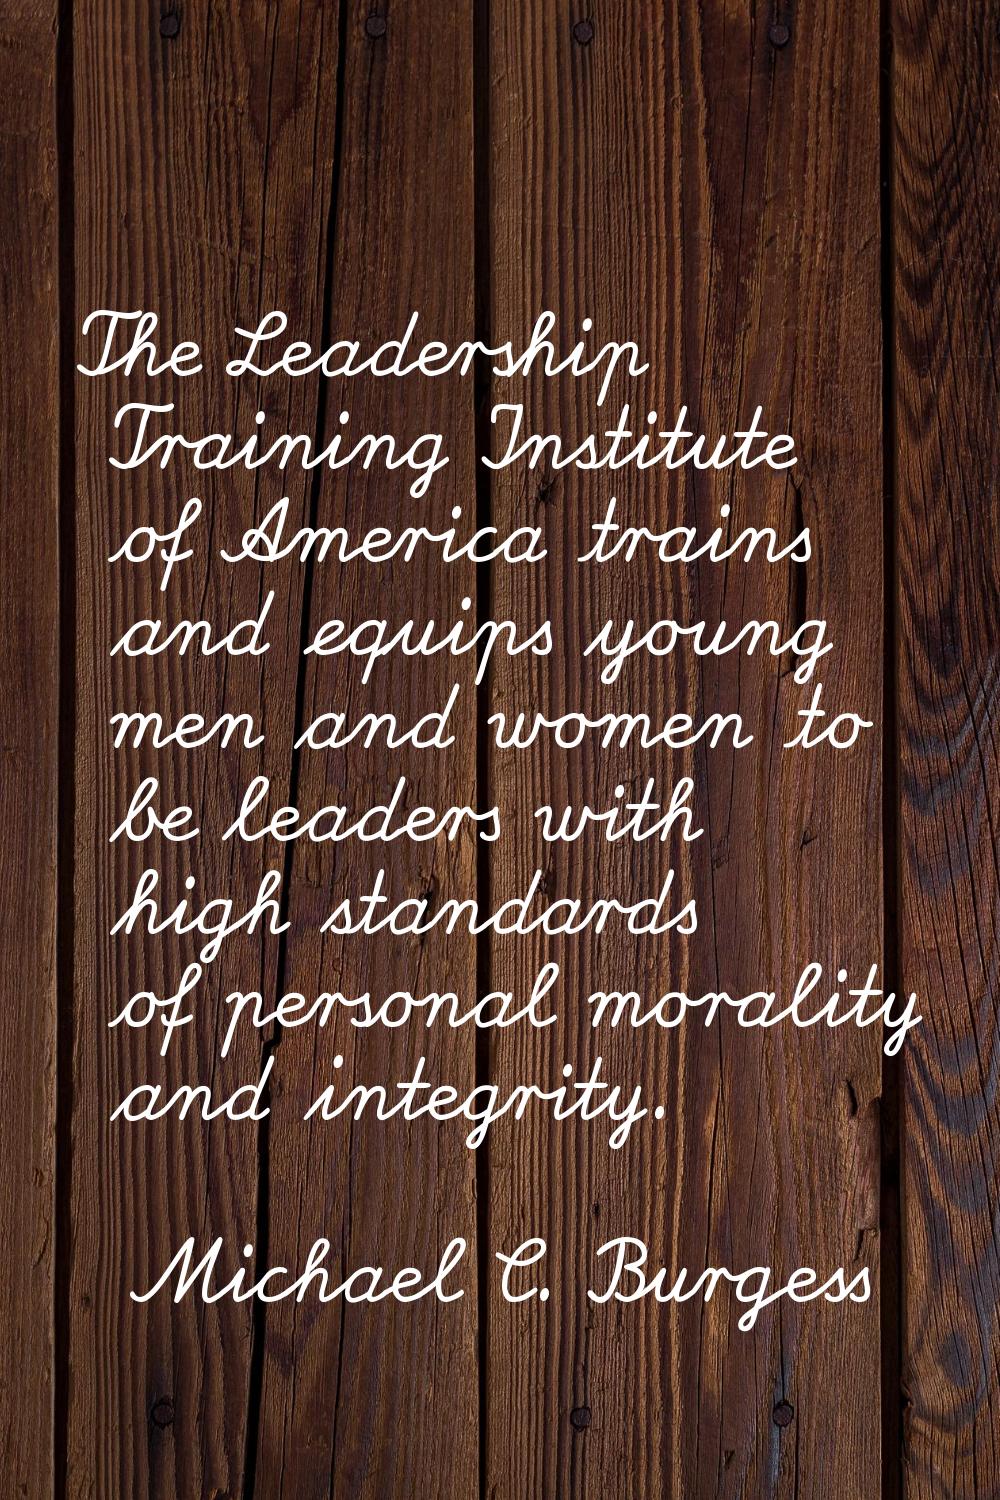 The Leadership Training Institute of America trains and equips young men and women to be leaders wi